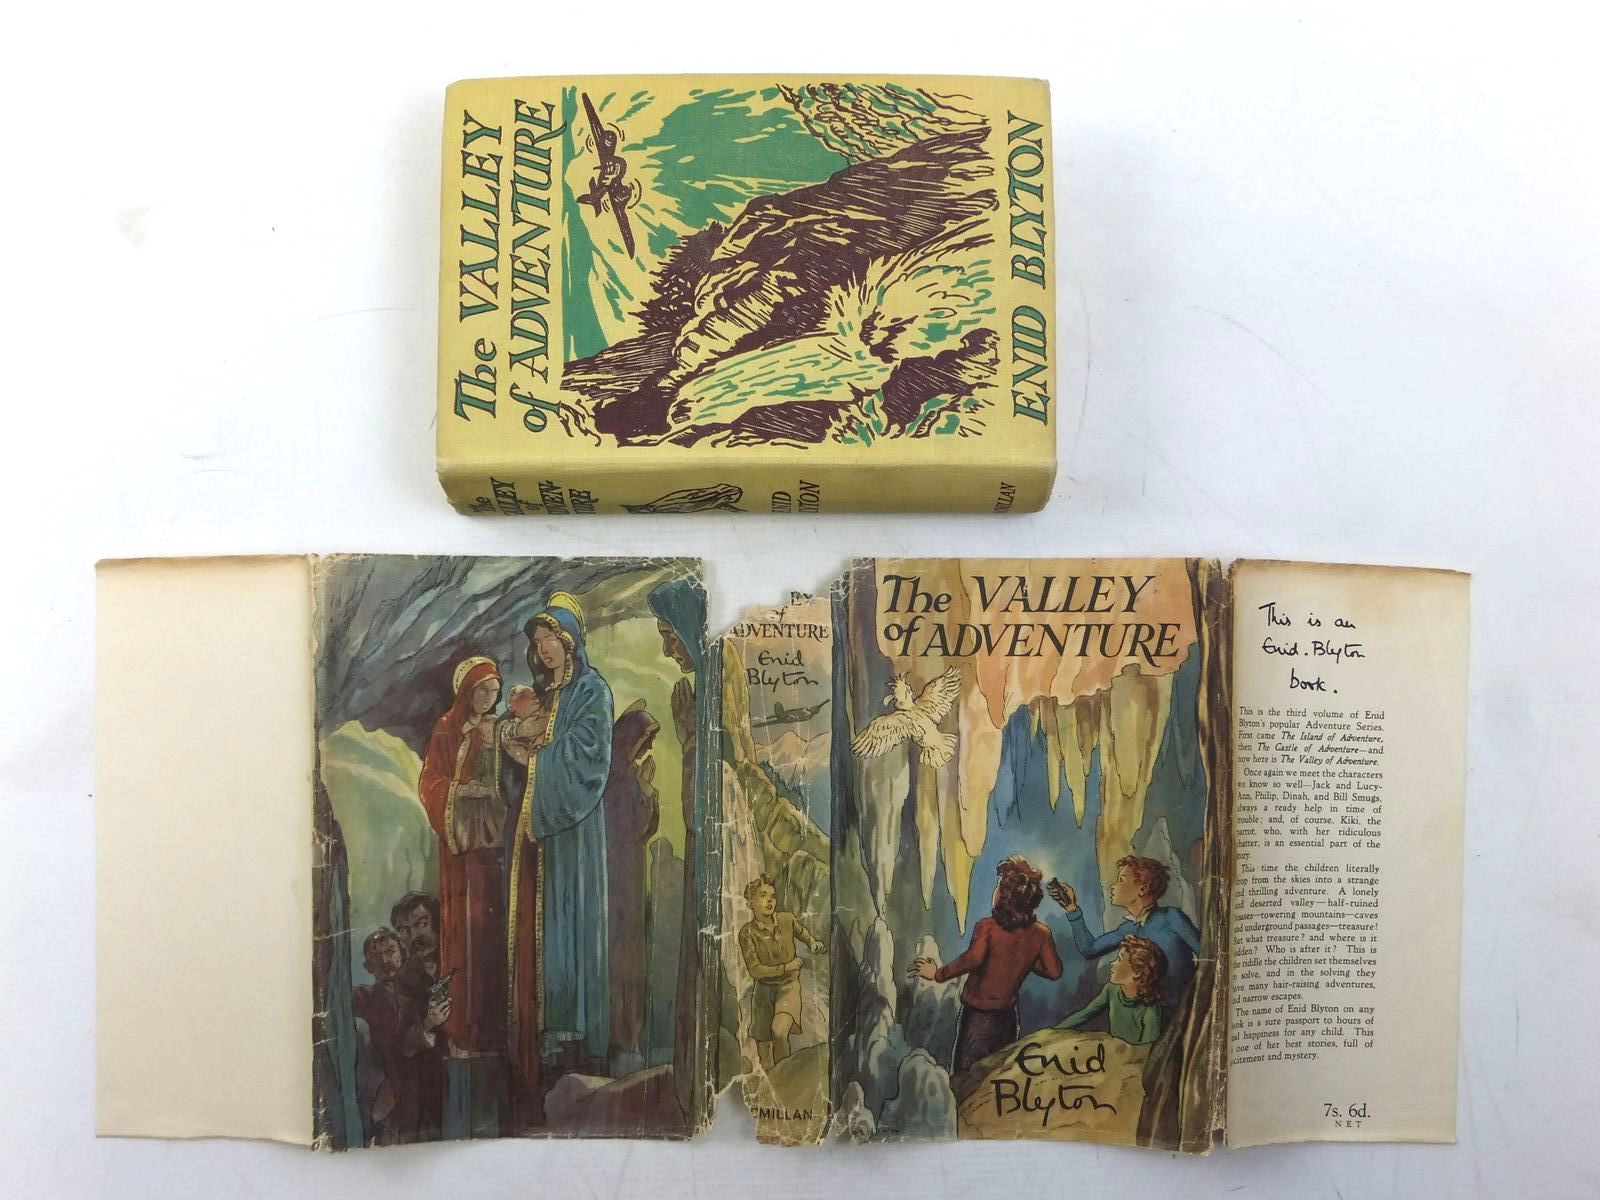 Photo of THE VALLEY OF ADVENTURE written by Blyton, Enid illustrated by Tresilian, Stuart published by Macmillan & Co. Ltd. (STOCK CODE: 2119195)  for sale by Stella & Rose's Books